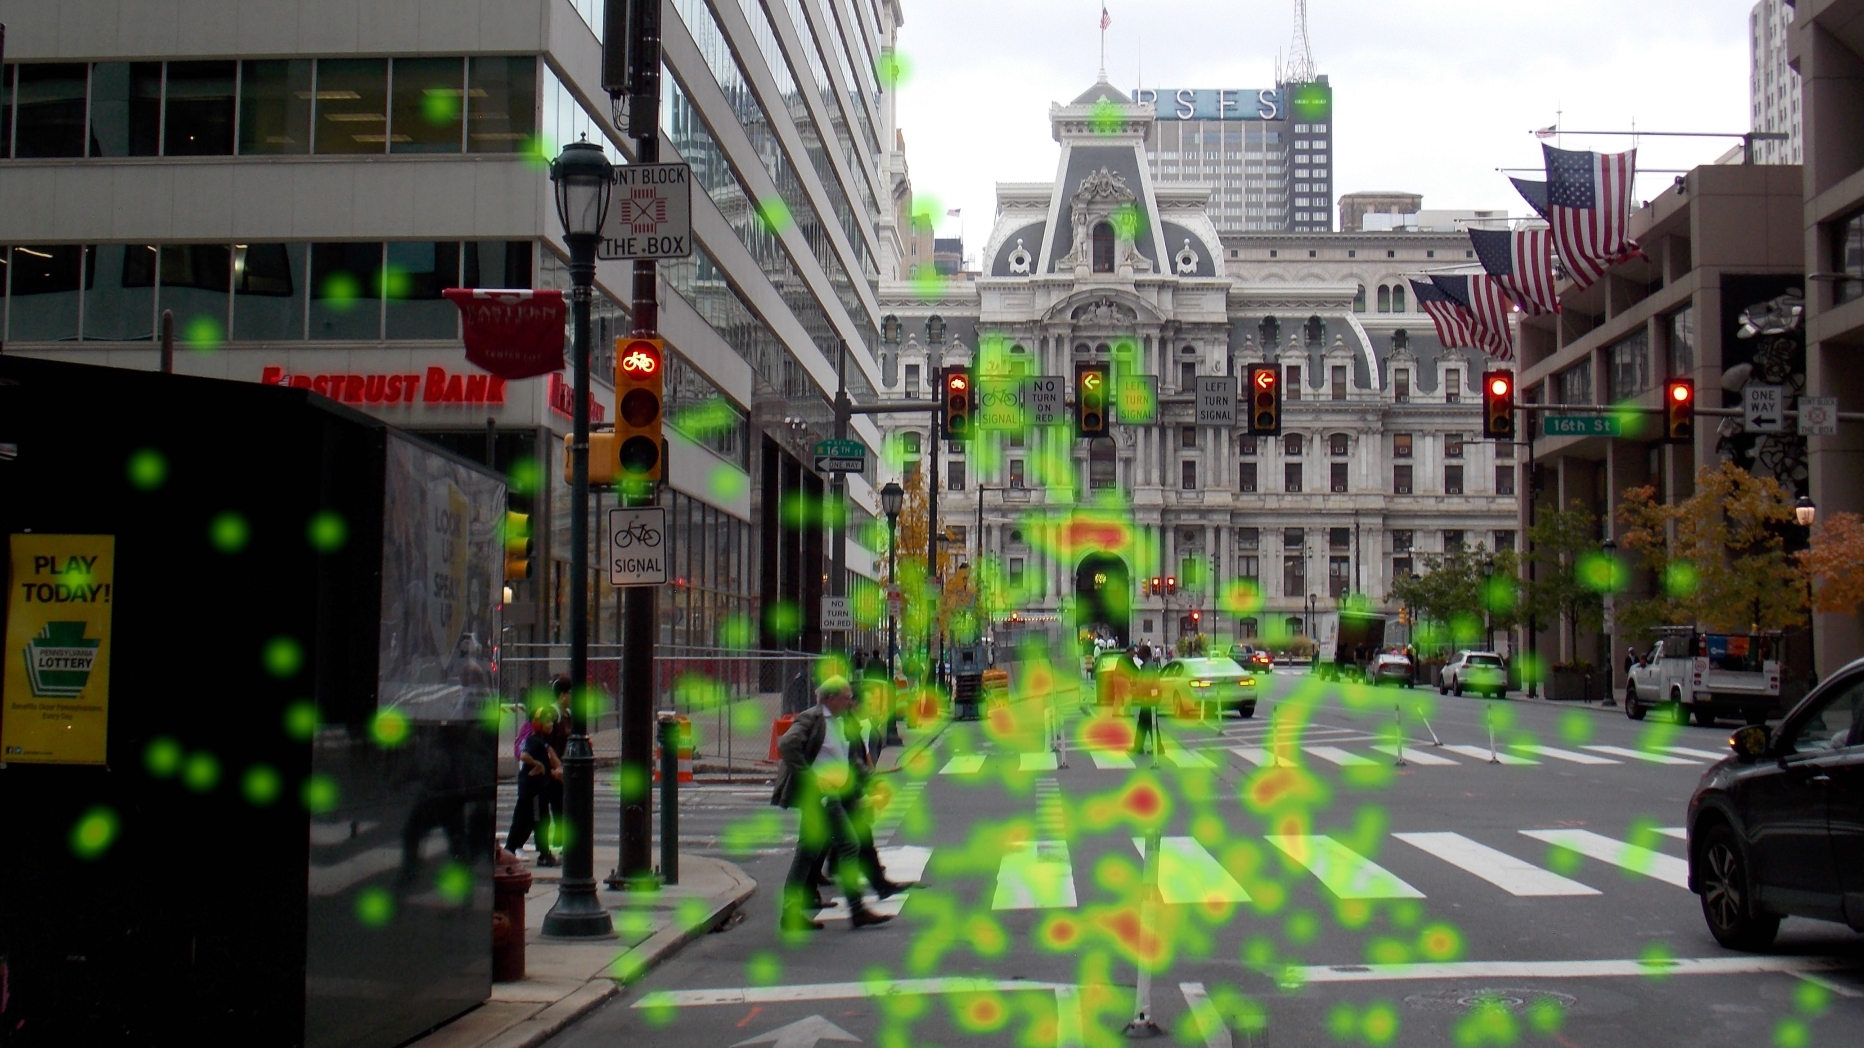 Display of eye tracking data superimposed over photograph of street view.